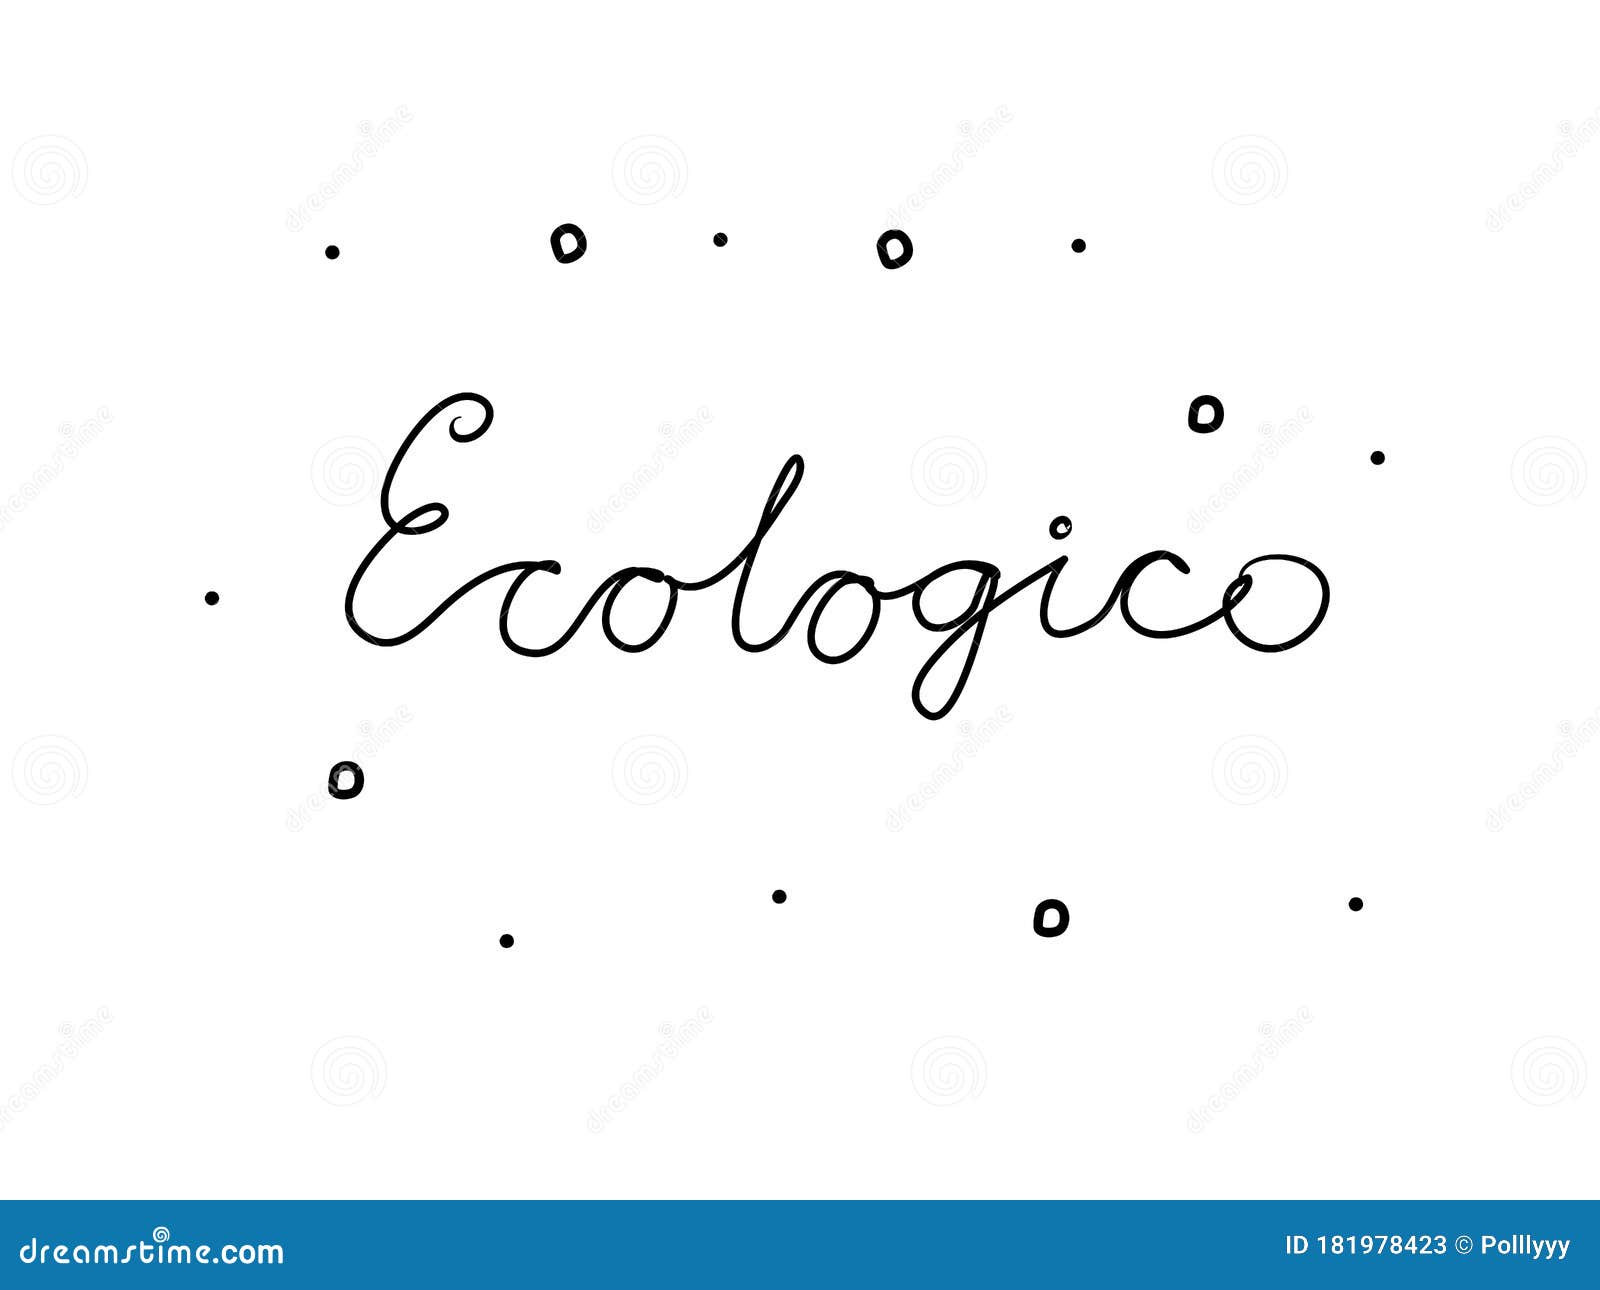 ecologico phrase handwritten with a calligraphy brush. ecological in italian. modern brush calligraphy.  word black